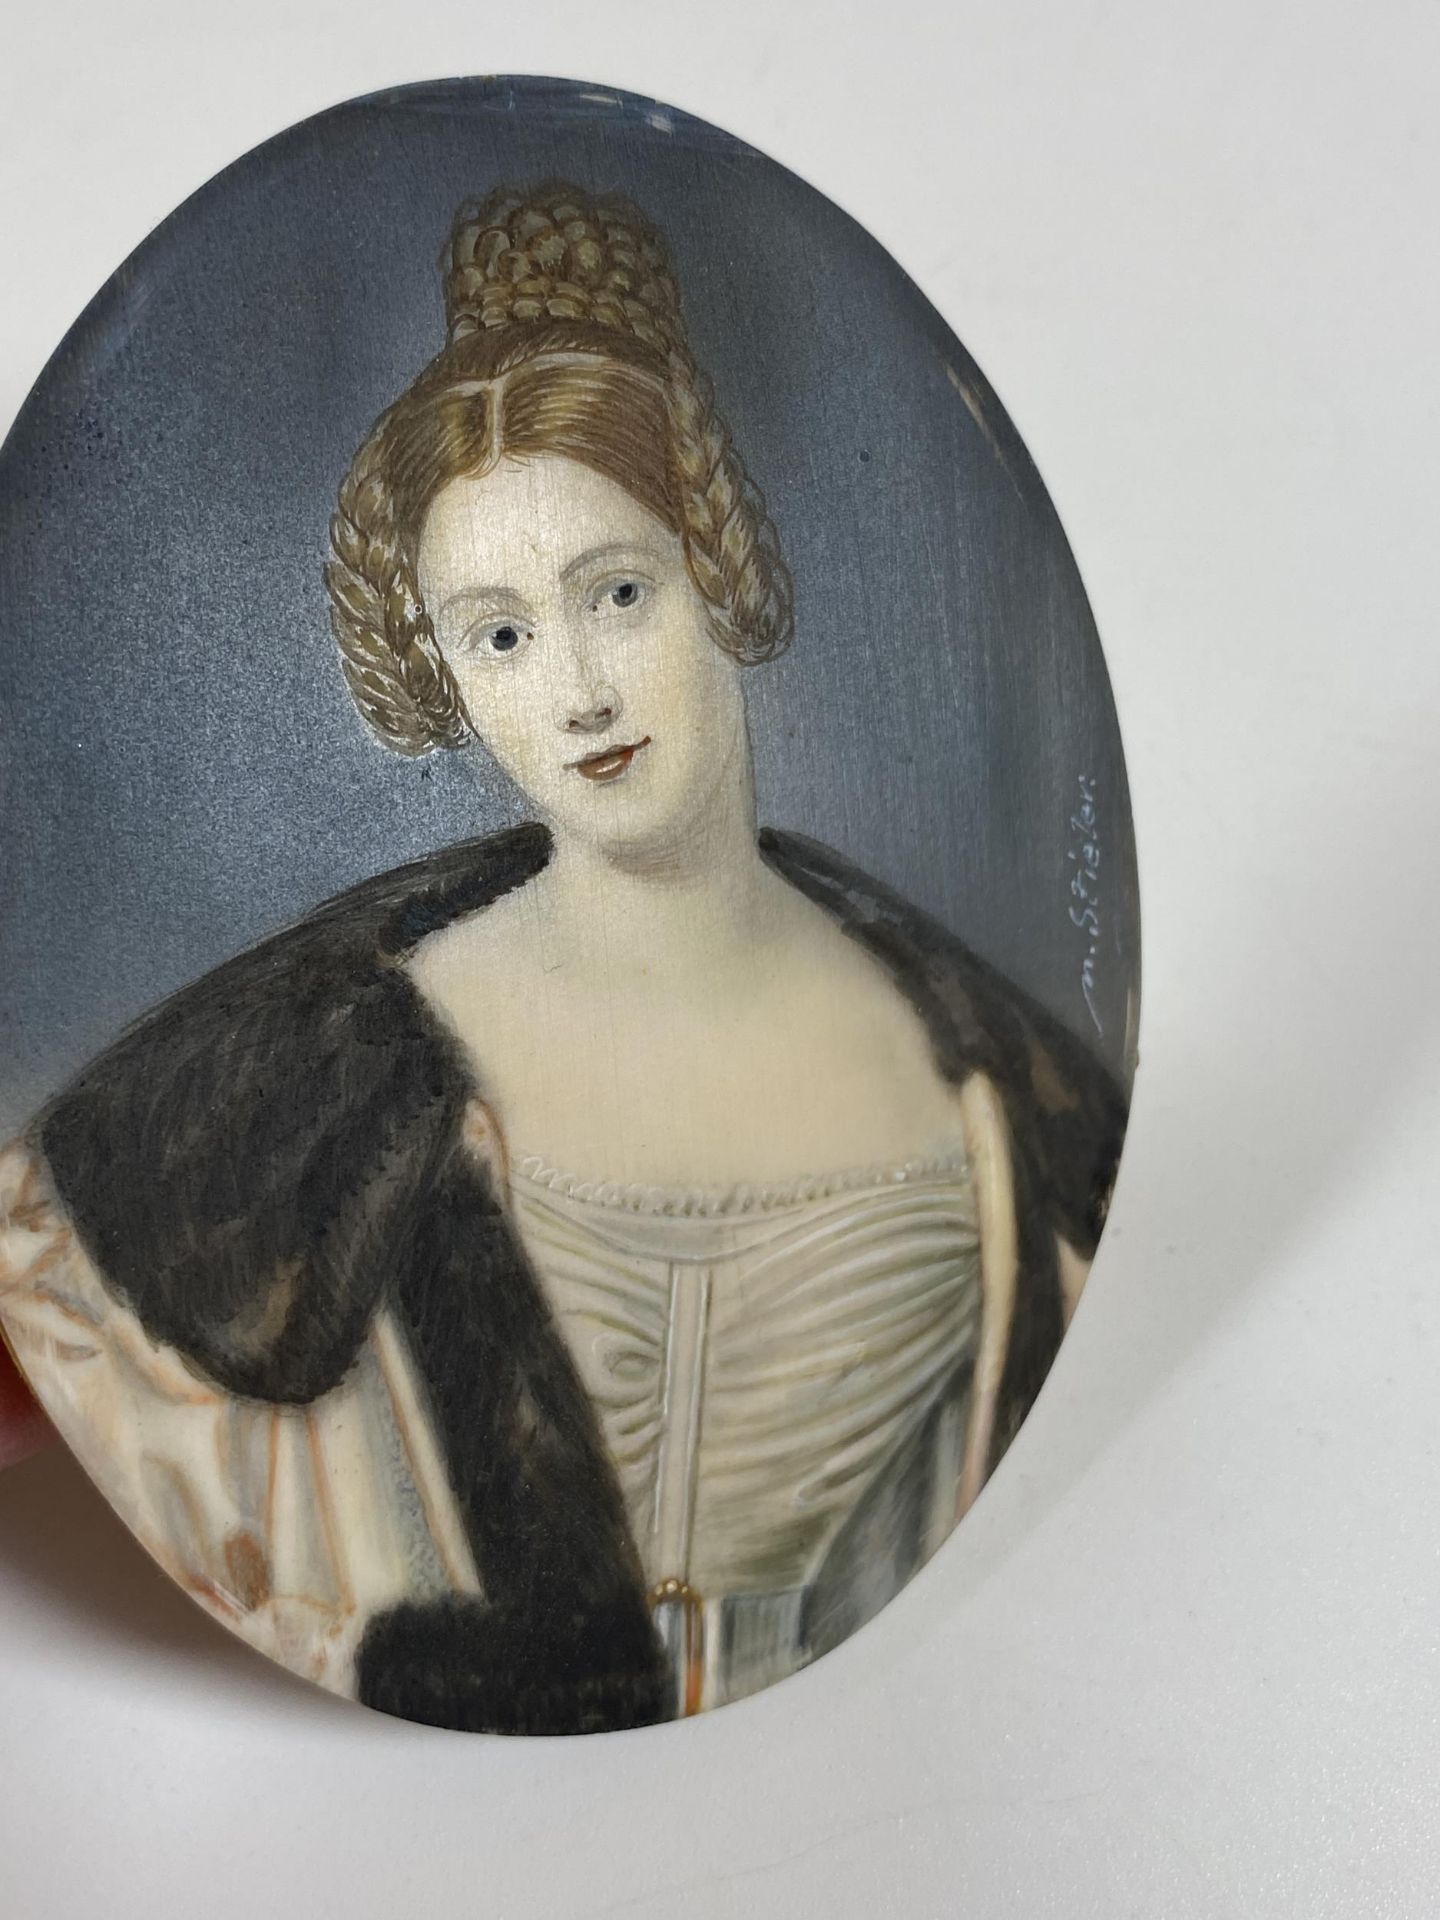 AN EARLY 19TH CENTURY HAND PAINTED PORTRAIT OF A LADY, SIGNED M.STIELER, IN ORNATE BRASS OVAL - Image 10 of 12